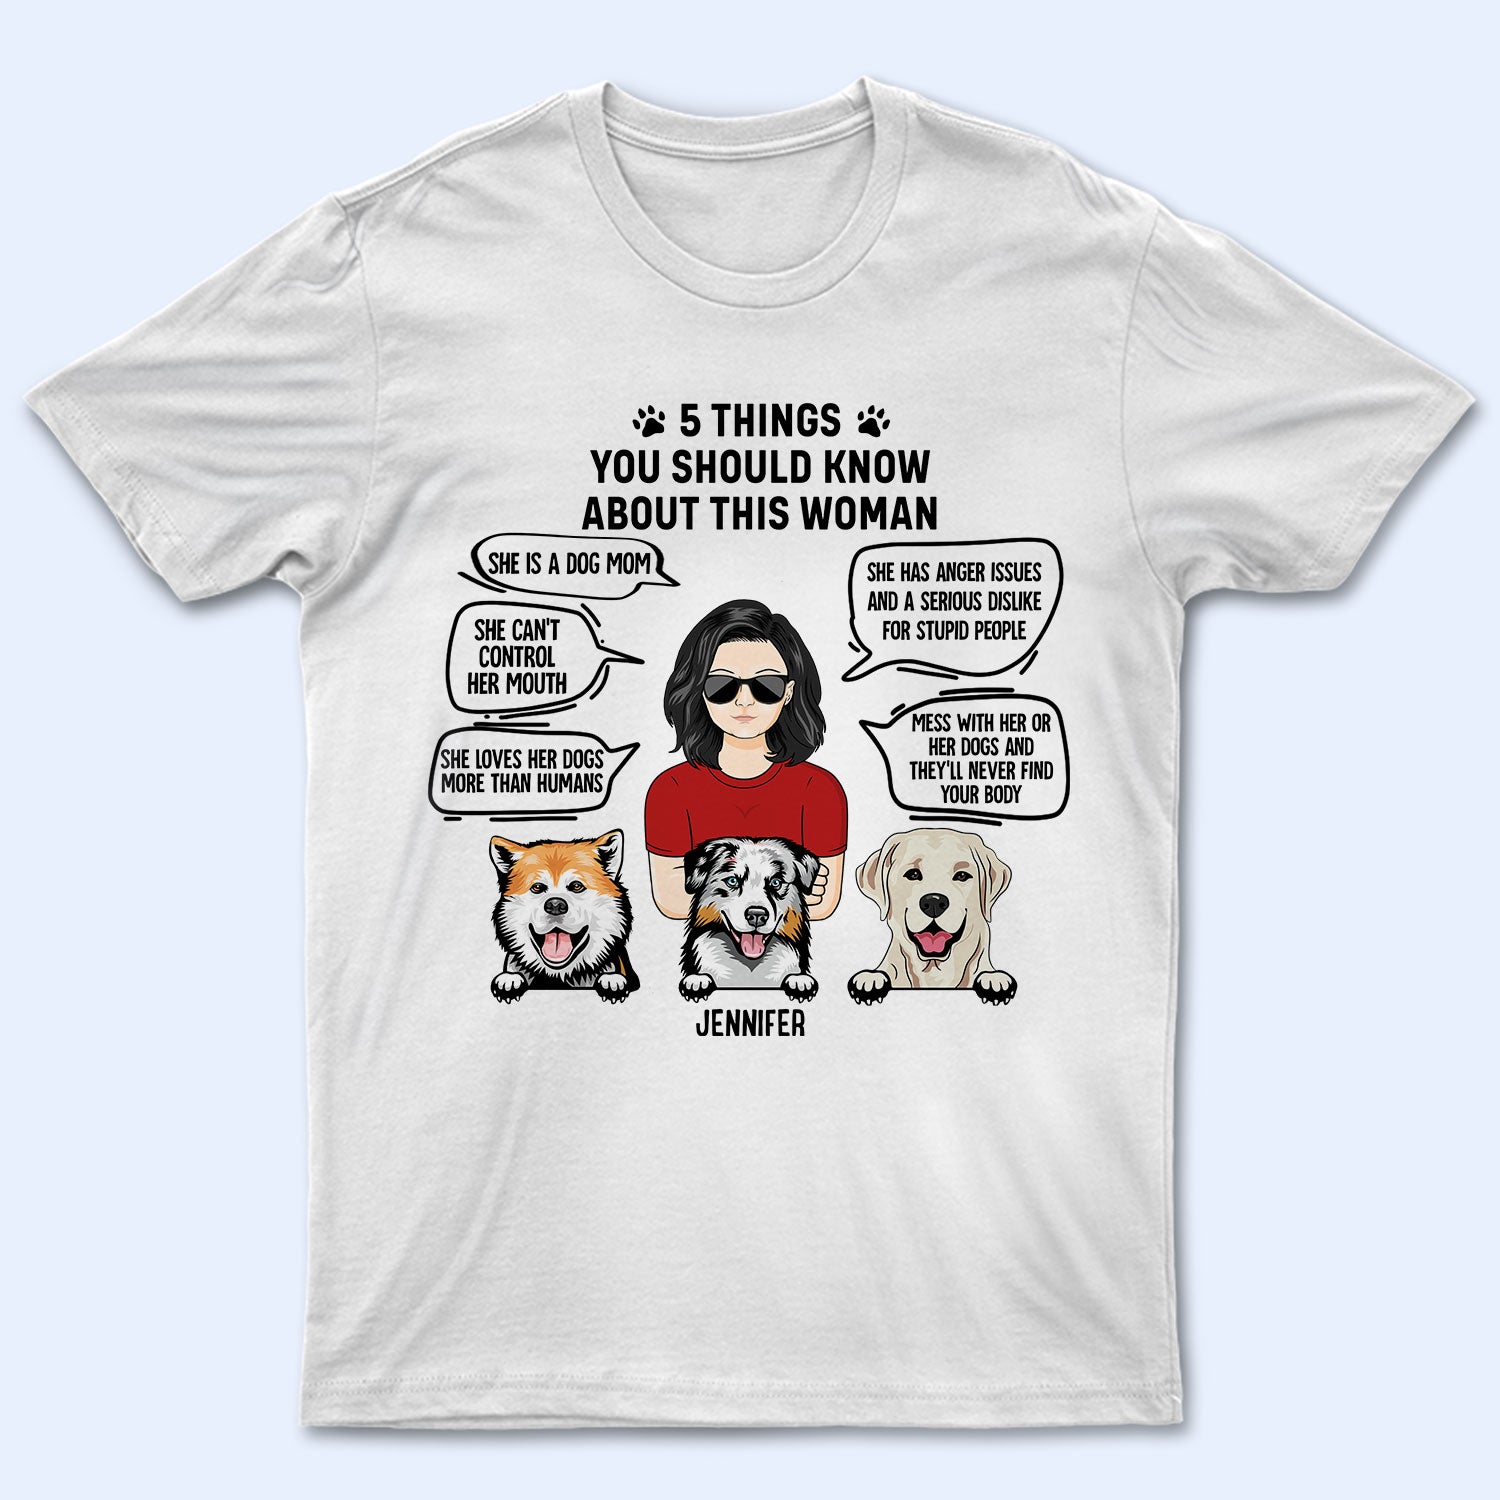 5 Things You Should Know About This Woman - Gift For Dog Moms, Dog Lovers - Personalized T Shirt